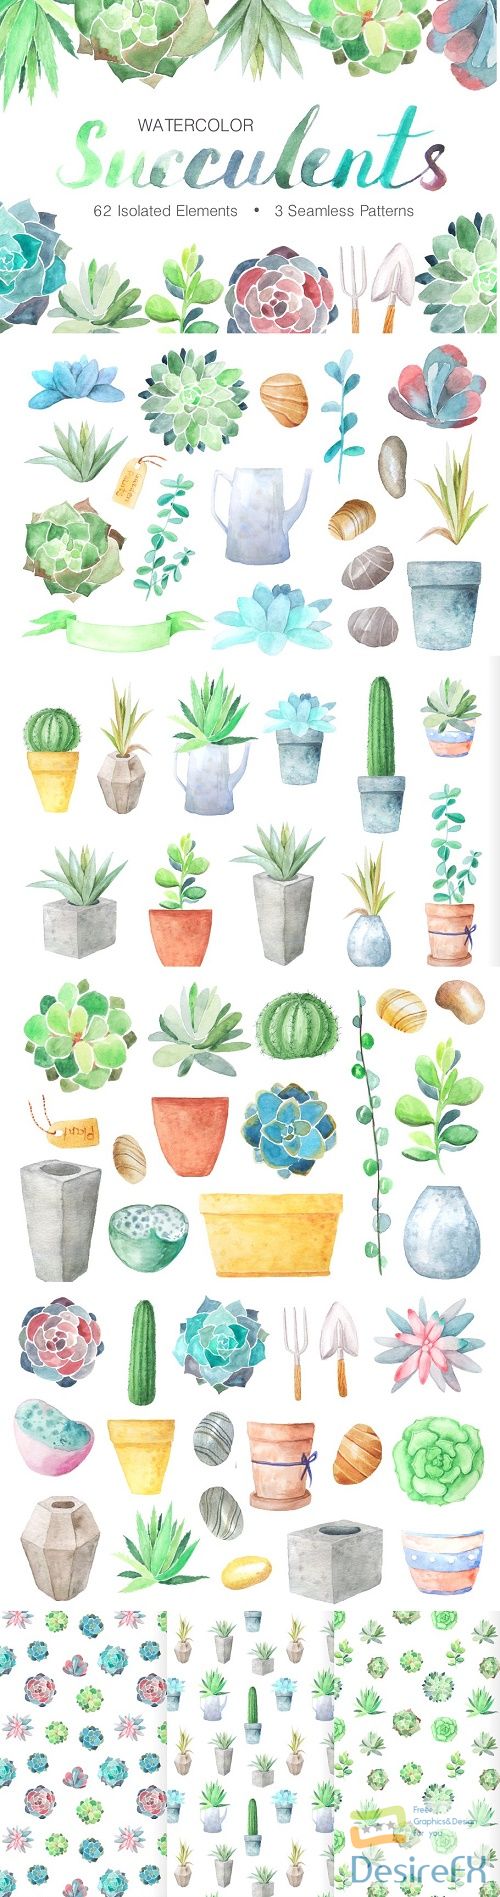 Watercolor Succulents Collection - 1254088